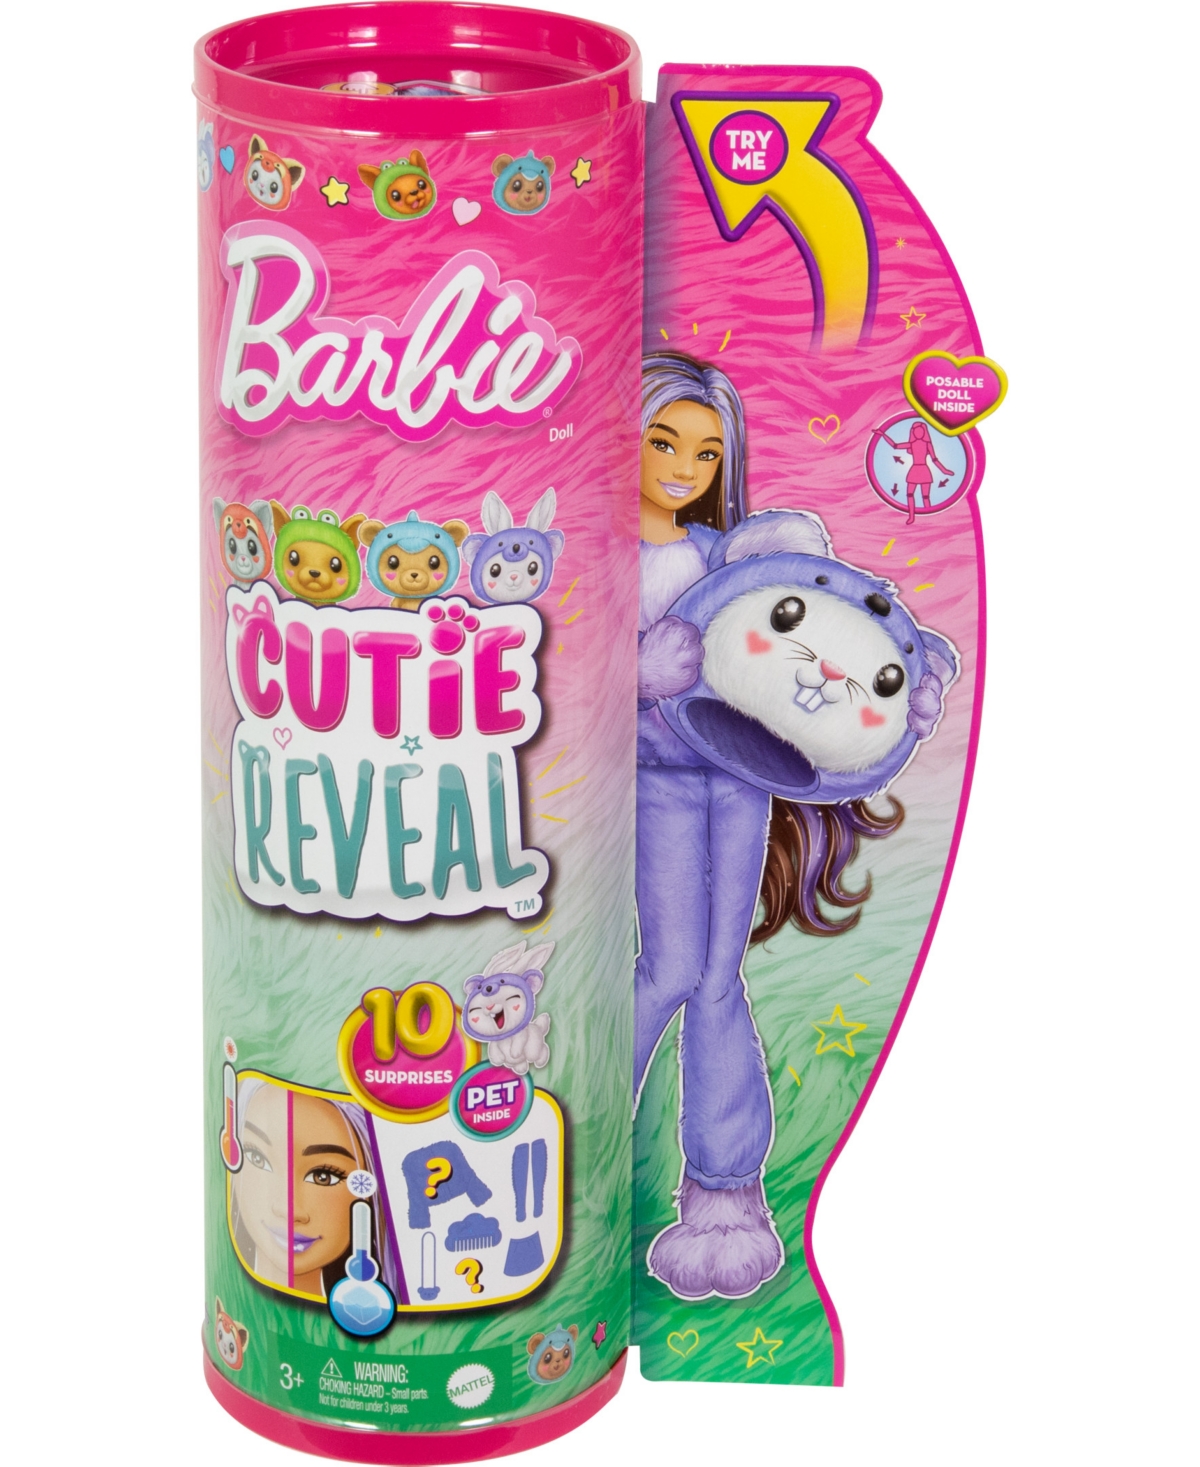 Shop Barbie Cutie Reveal Costume-themed Doll And Accessories With 10 Surprises, Bunny As A Koala In Multi